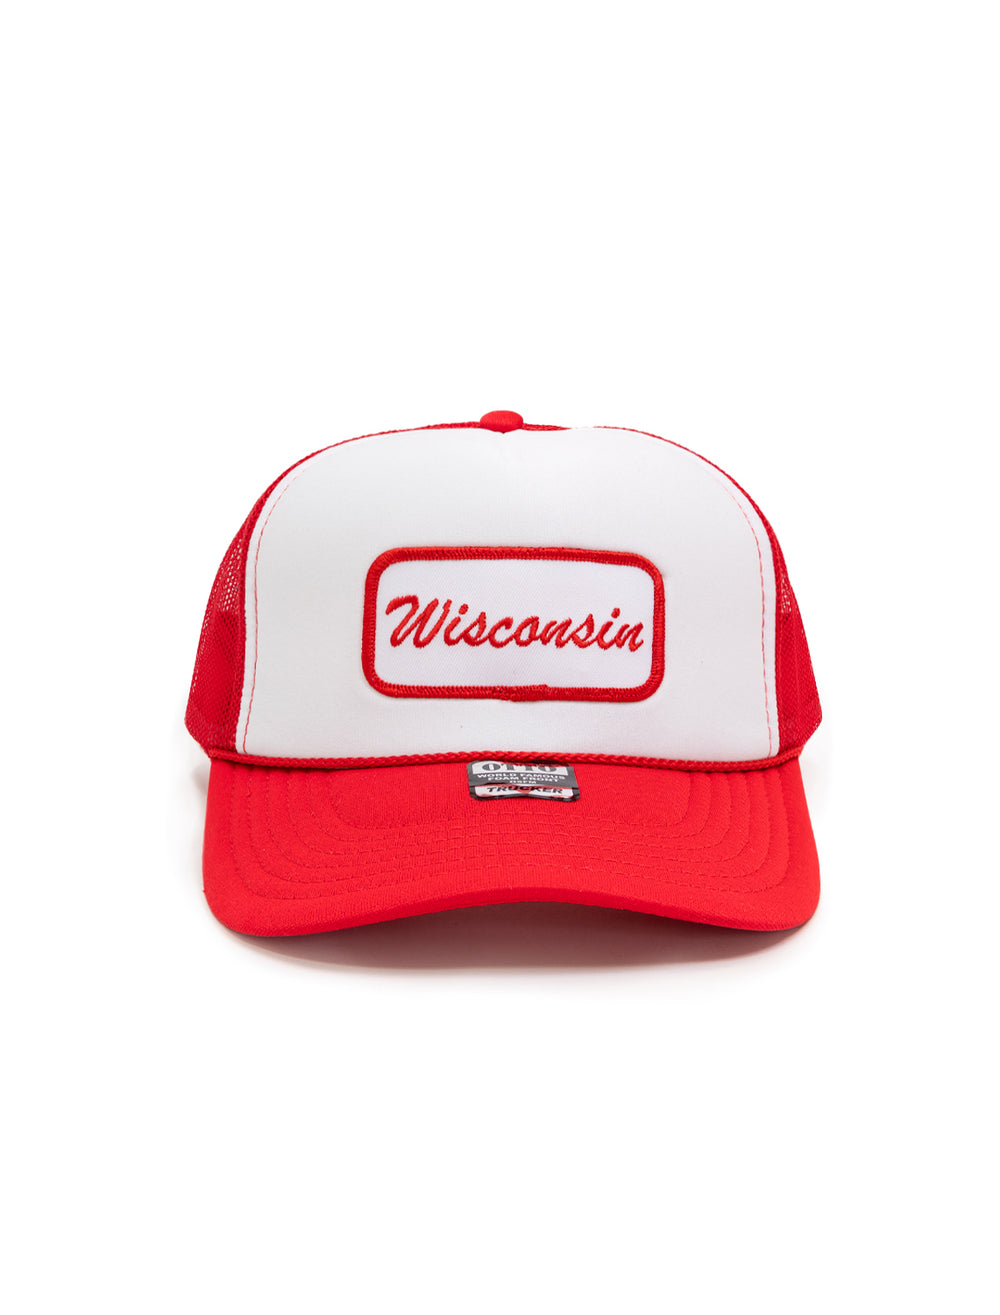 Recess Apparel's Name Plate Trucker Hat in Red and White.